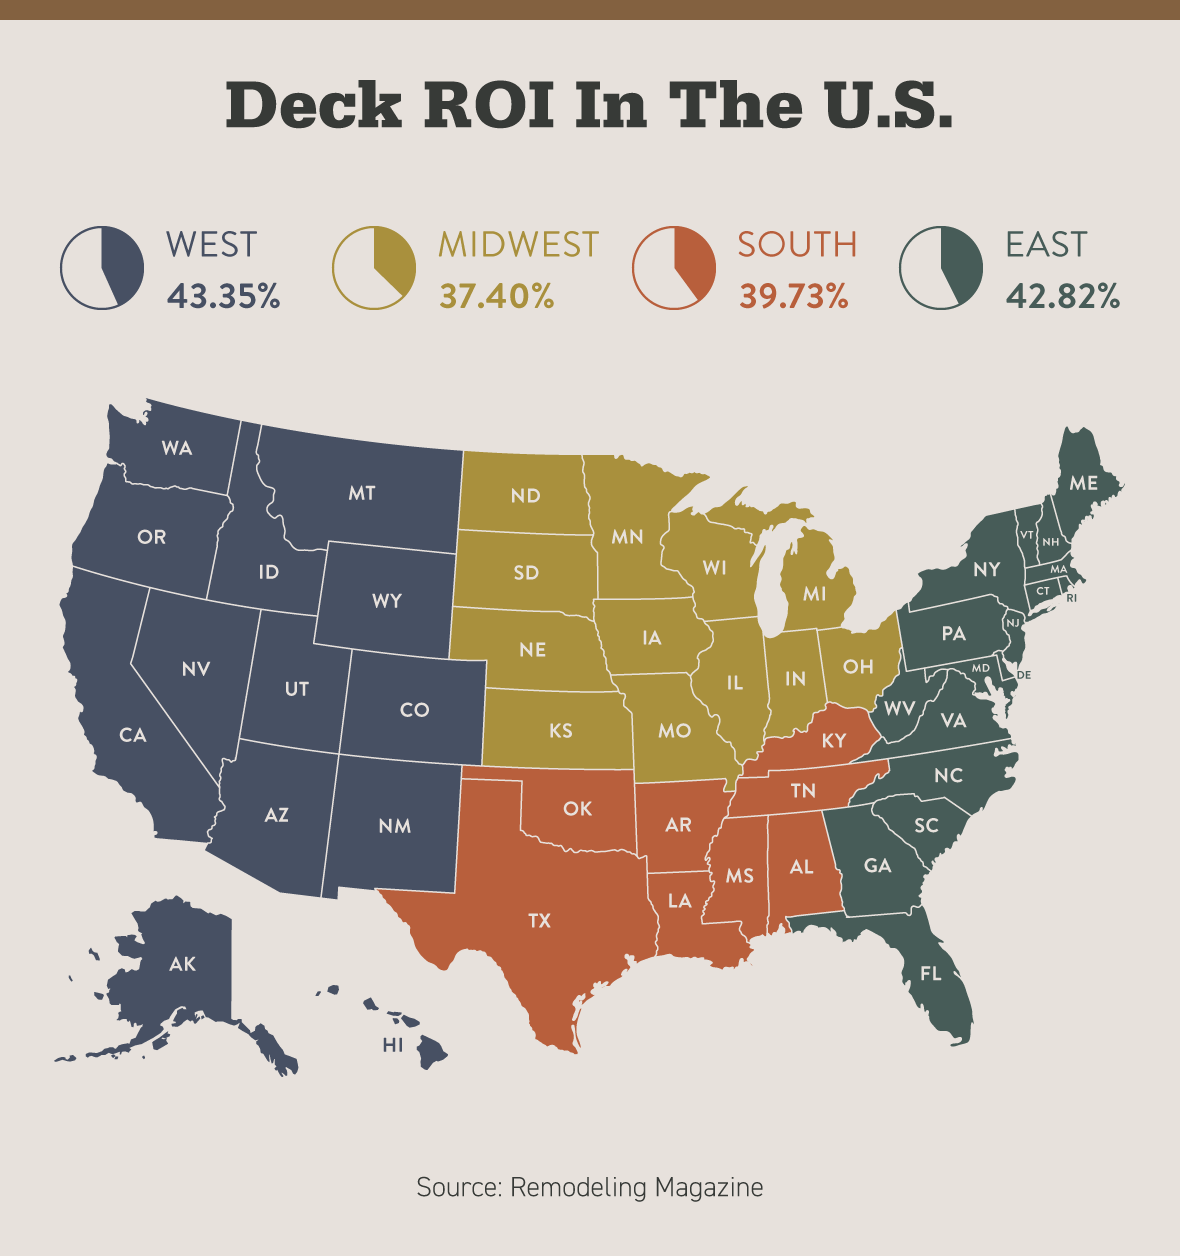 A U.S. map is color-coded into 4 regions to showcase how deck ROI varies geographically. 